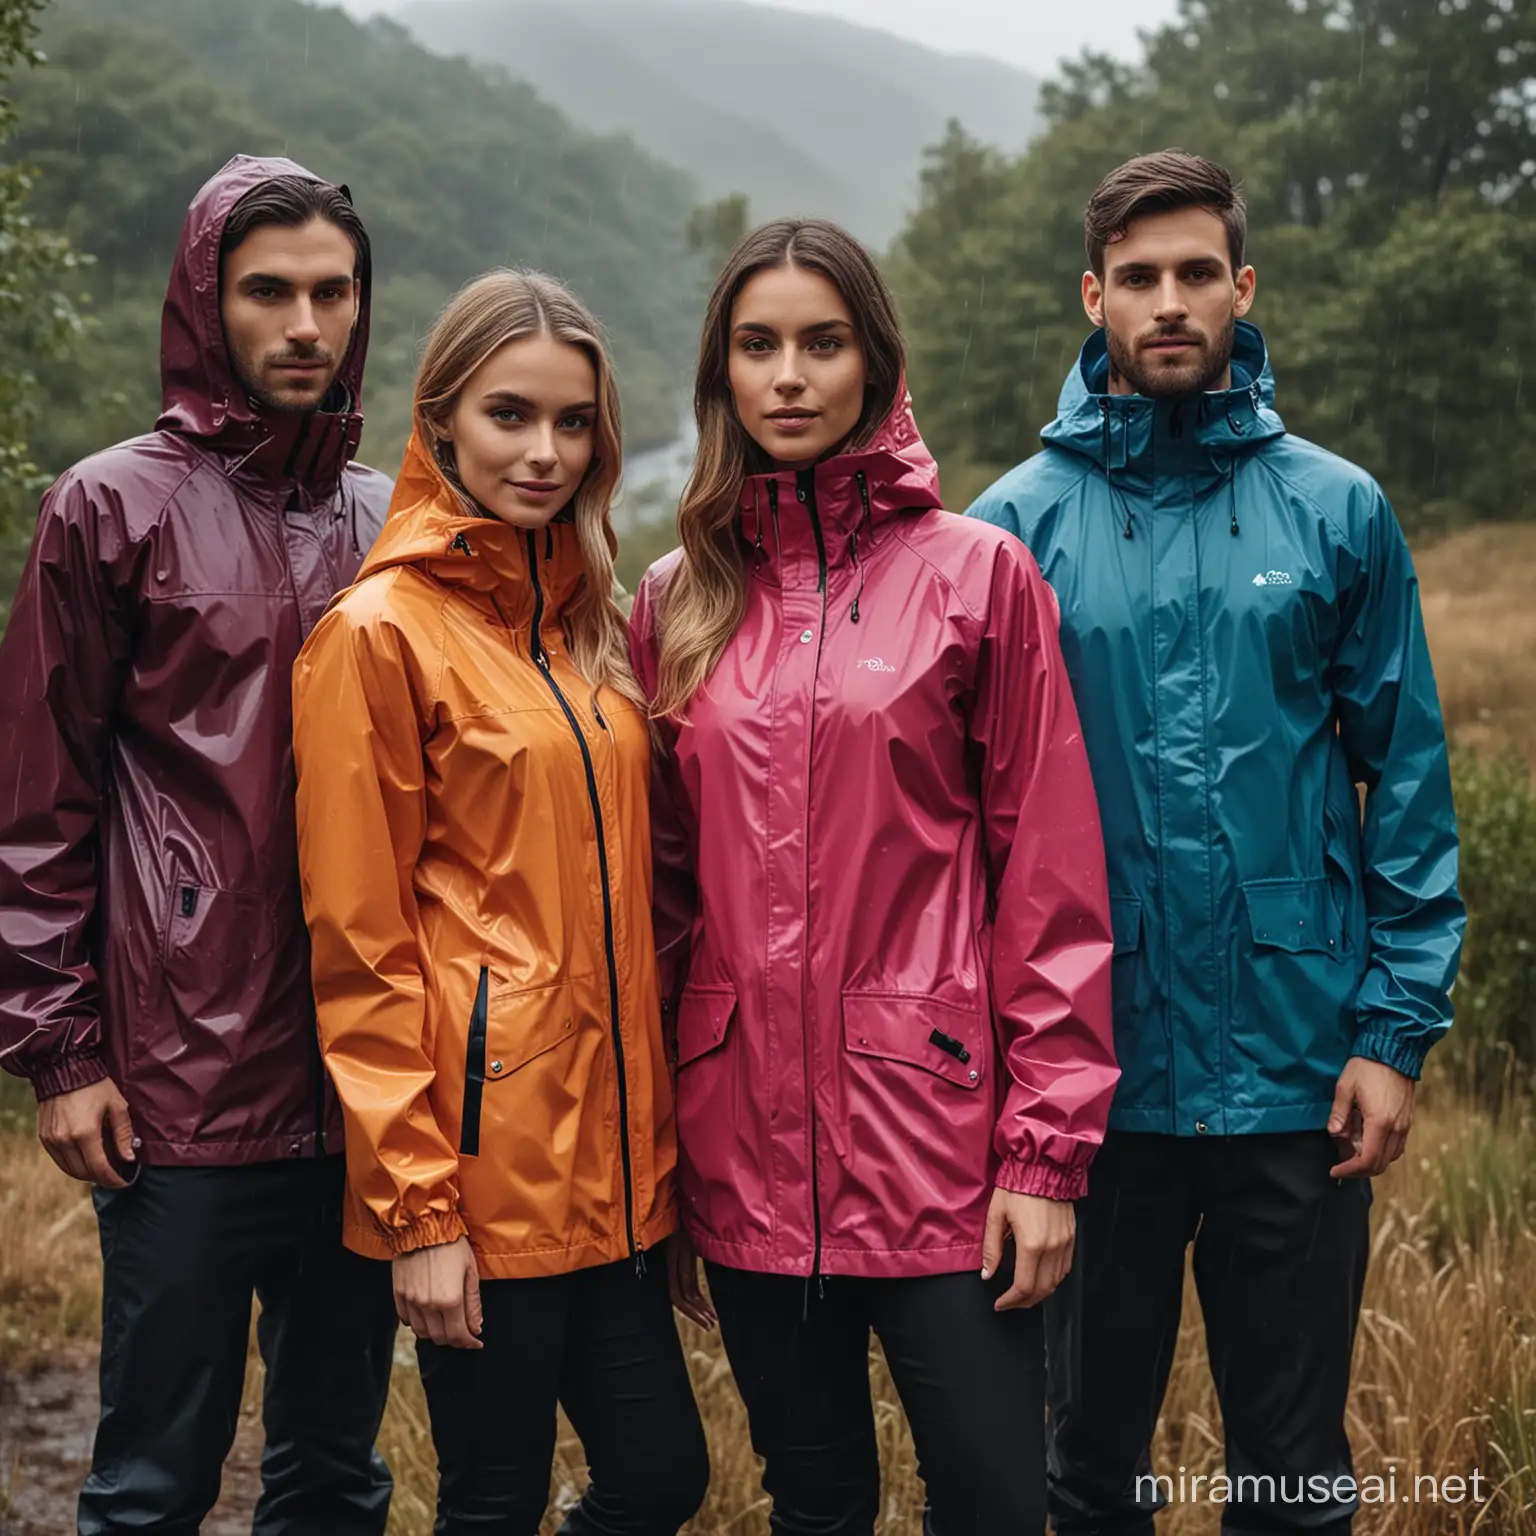 People in modern style rain jackets poseing for a promo picture for rain jackets to a web page diffrent colours outdoors

